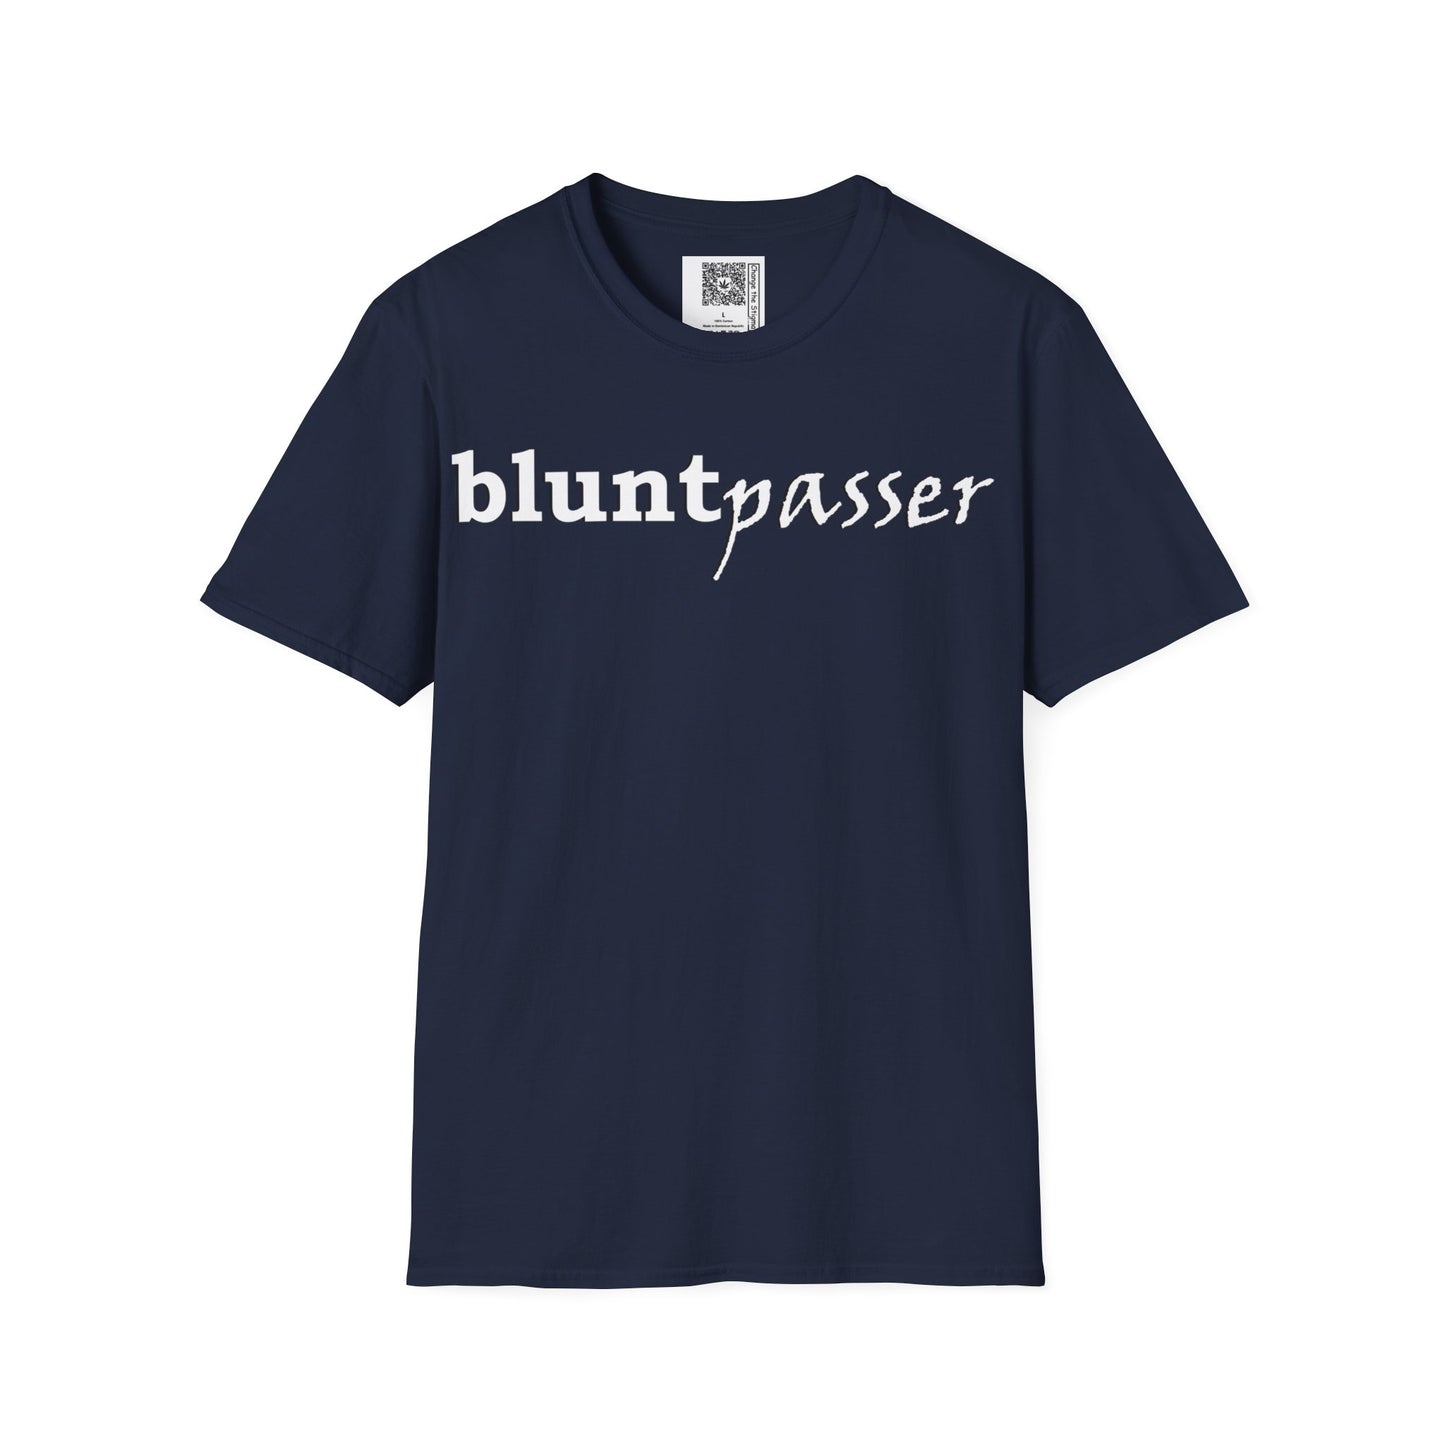 Change the Stigma, Navy color, shirt saying "blunt passer", Shirt is open displayed, Qr code is shown neck tag